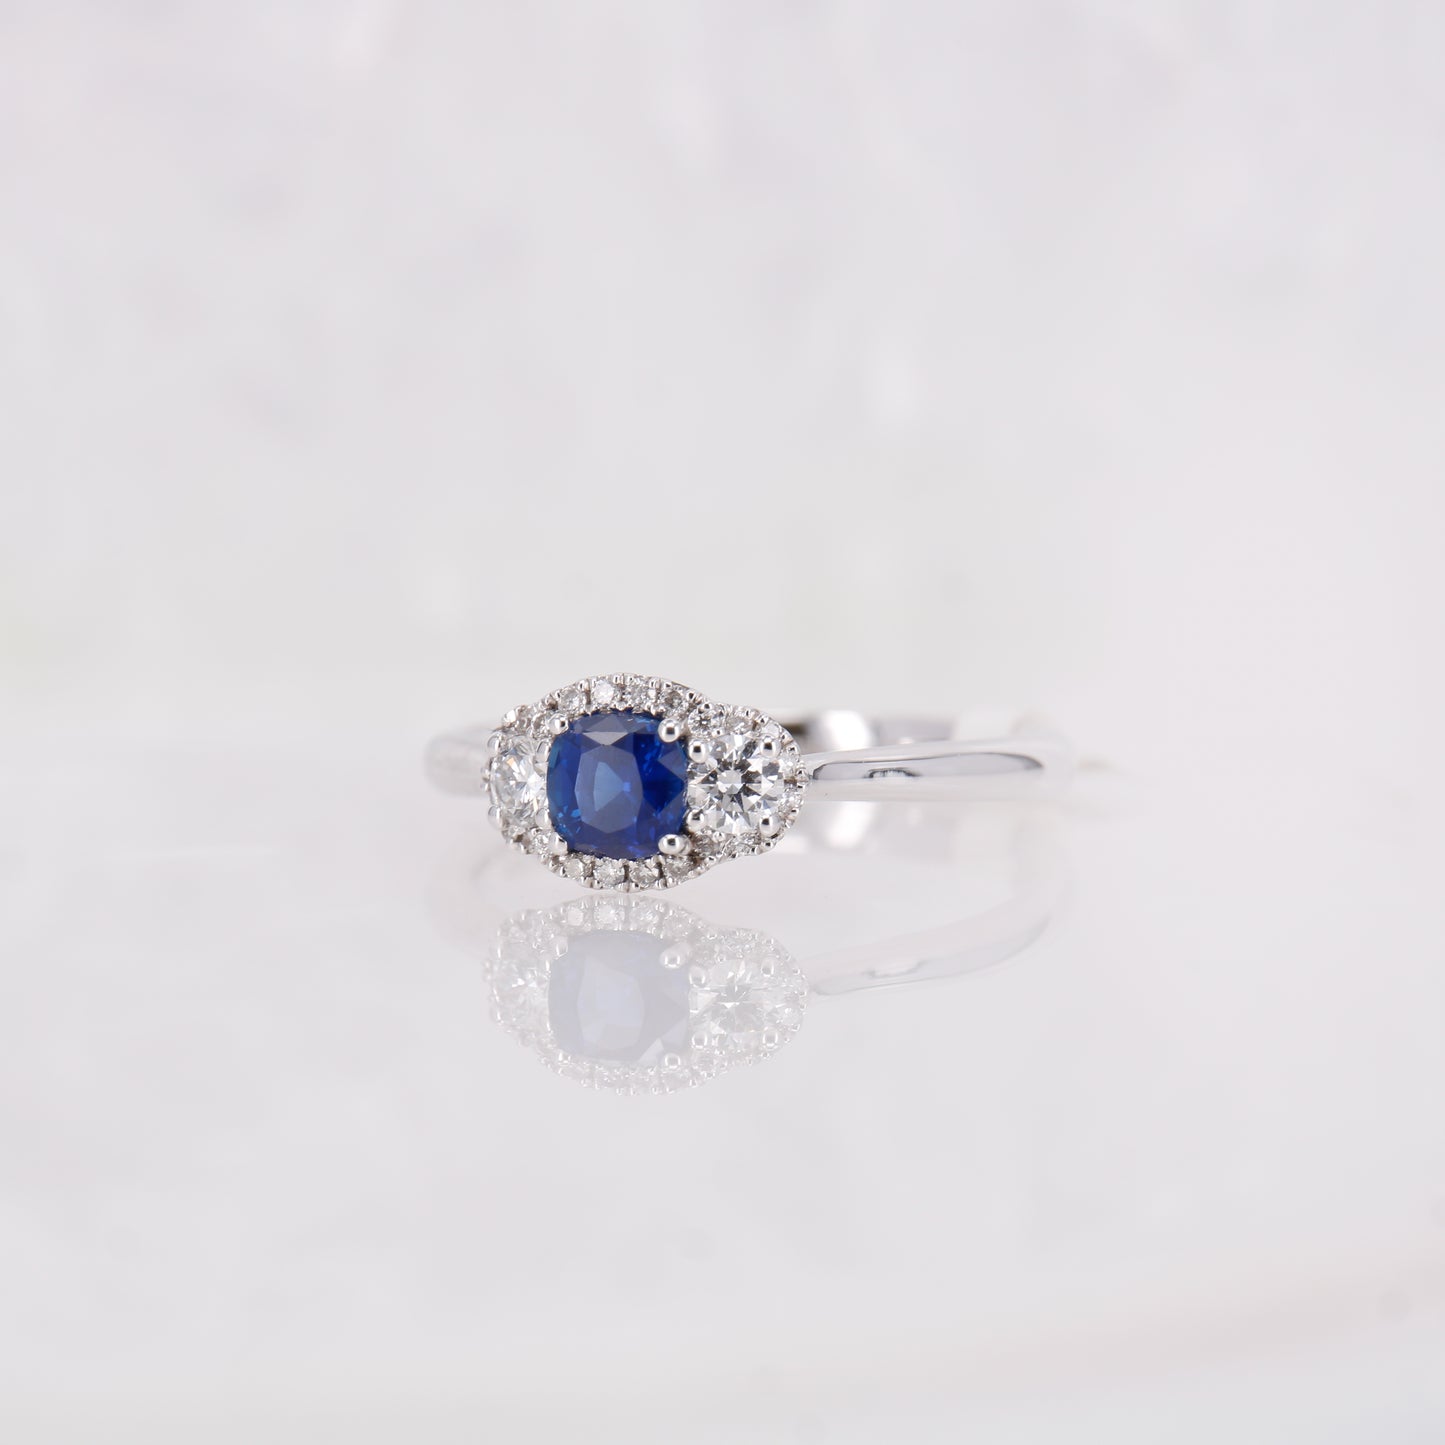 18CT White Gold Sapphire and Diamond three stone ring with a halo of diamonds surrounding. 